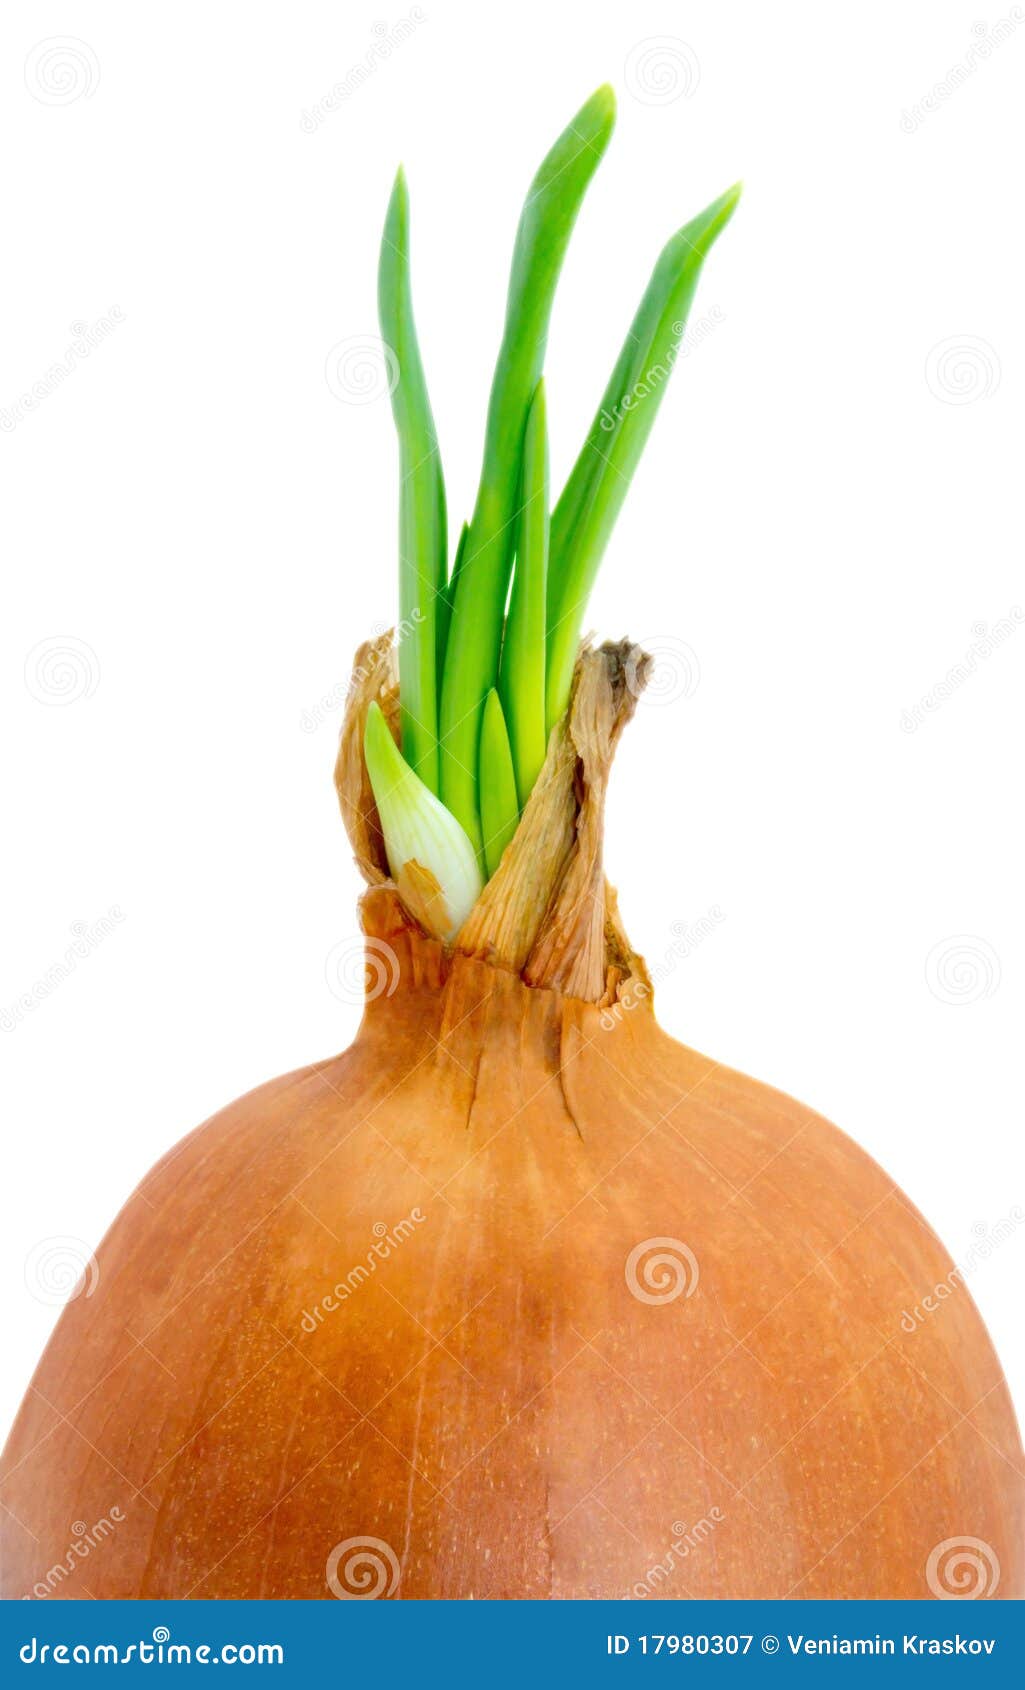 Onion spring close-up. An onion sprouting and trying to grow isolated on white background. Clipping path.